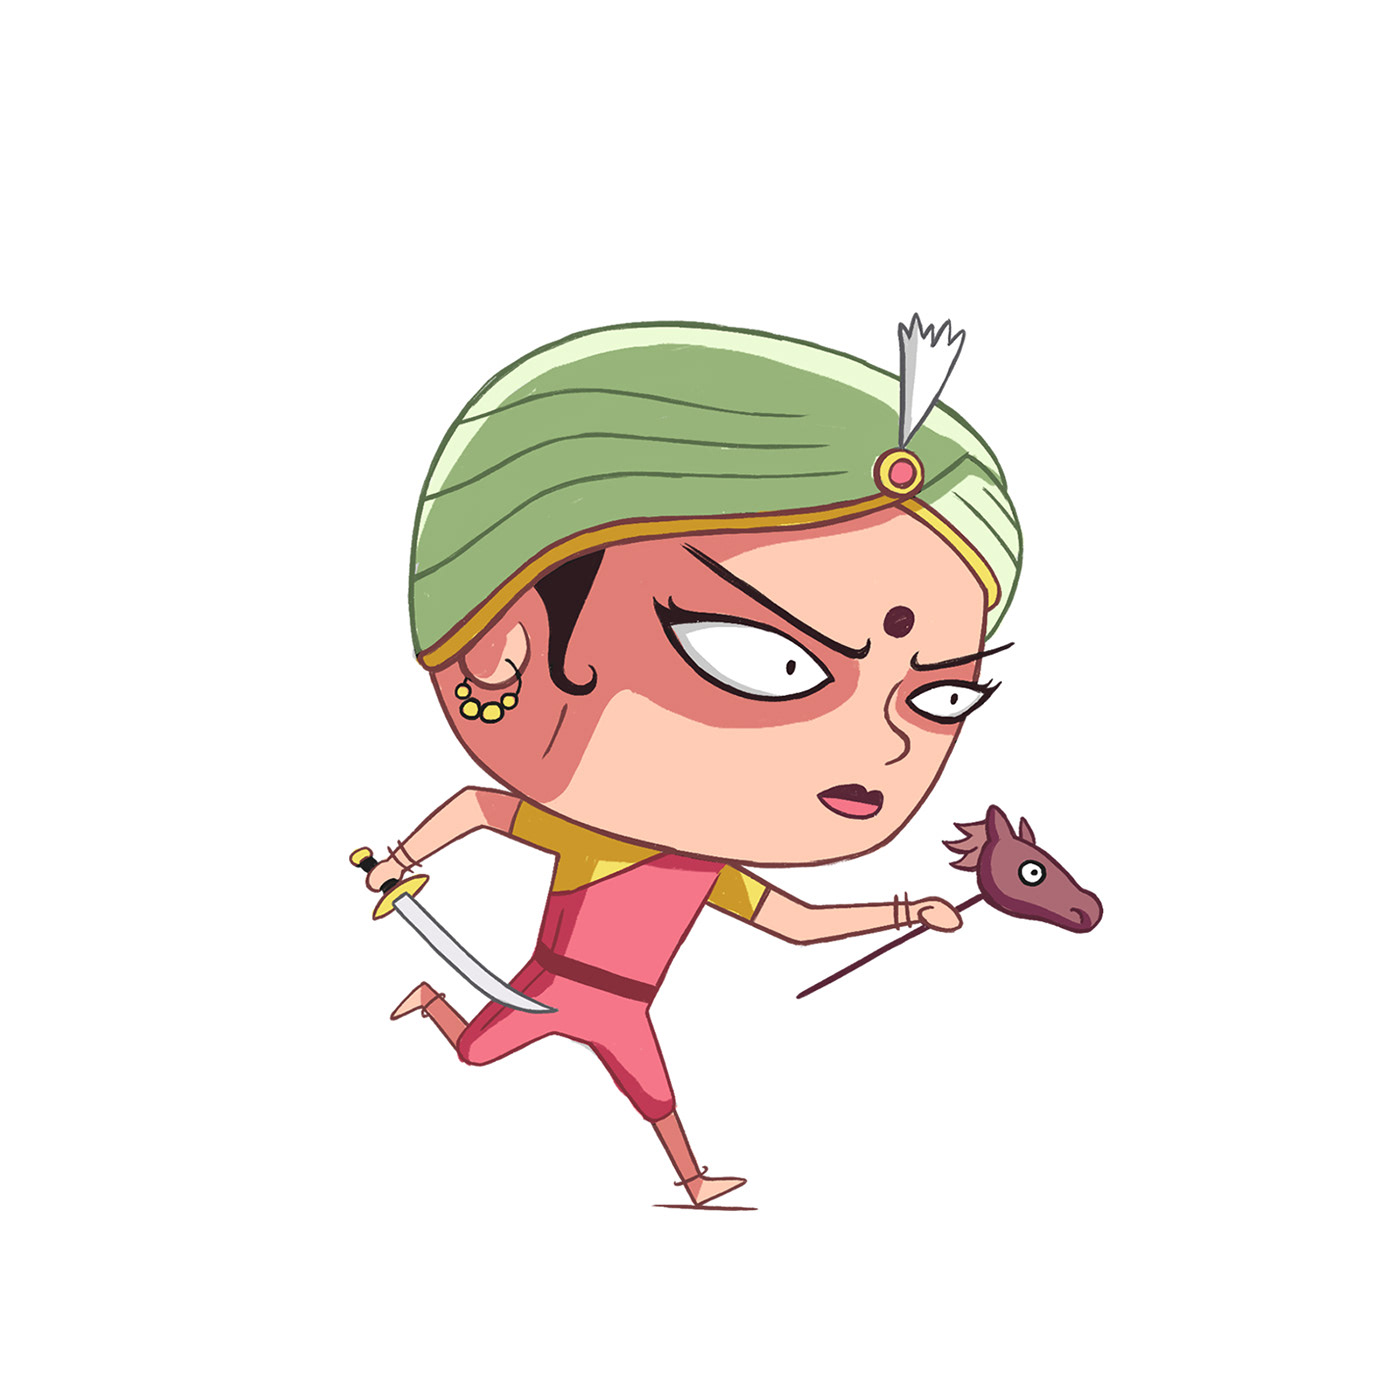 Character characterdesign Folklore game gameart gamecharacter India indiancharacters mythology videogame